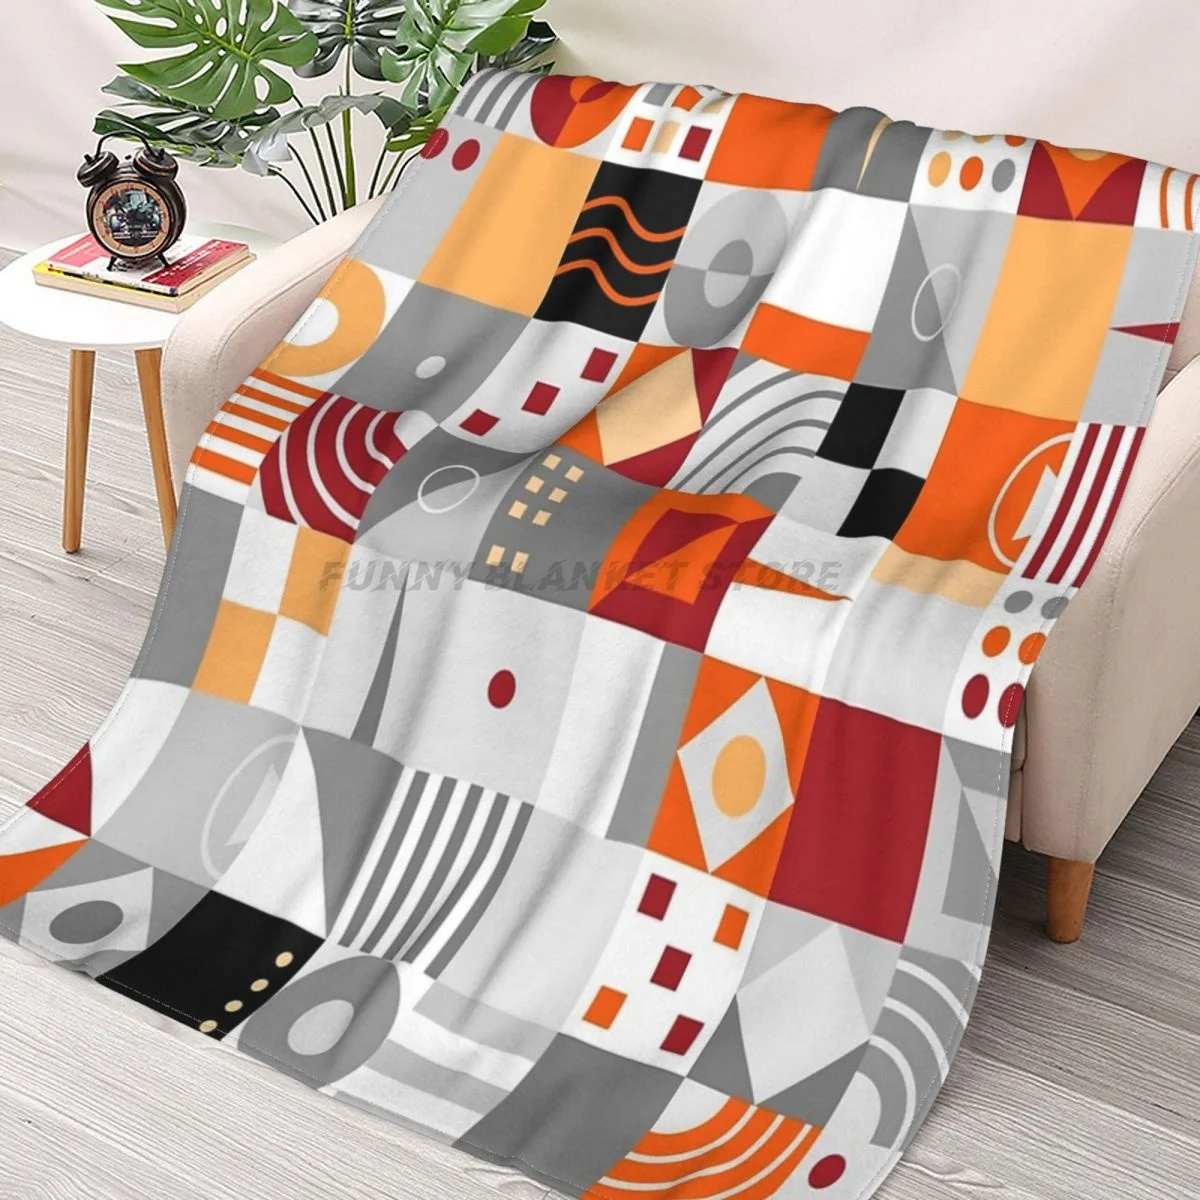 Flatiron Park New York Abstract Red Geometric Design Throws Blankets Collage Flannel Ultra-Soft Warm picnic blanket bedspread ultimate new york design